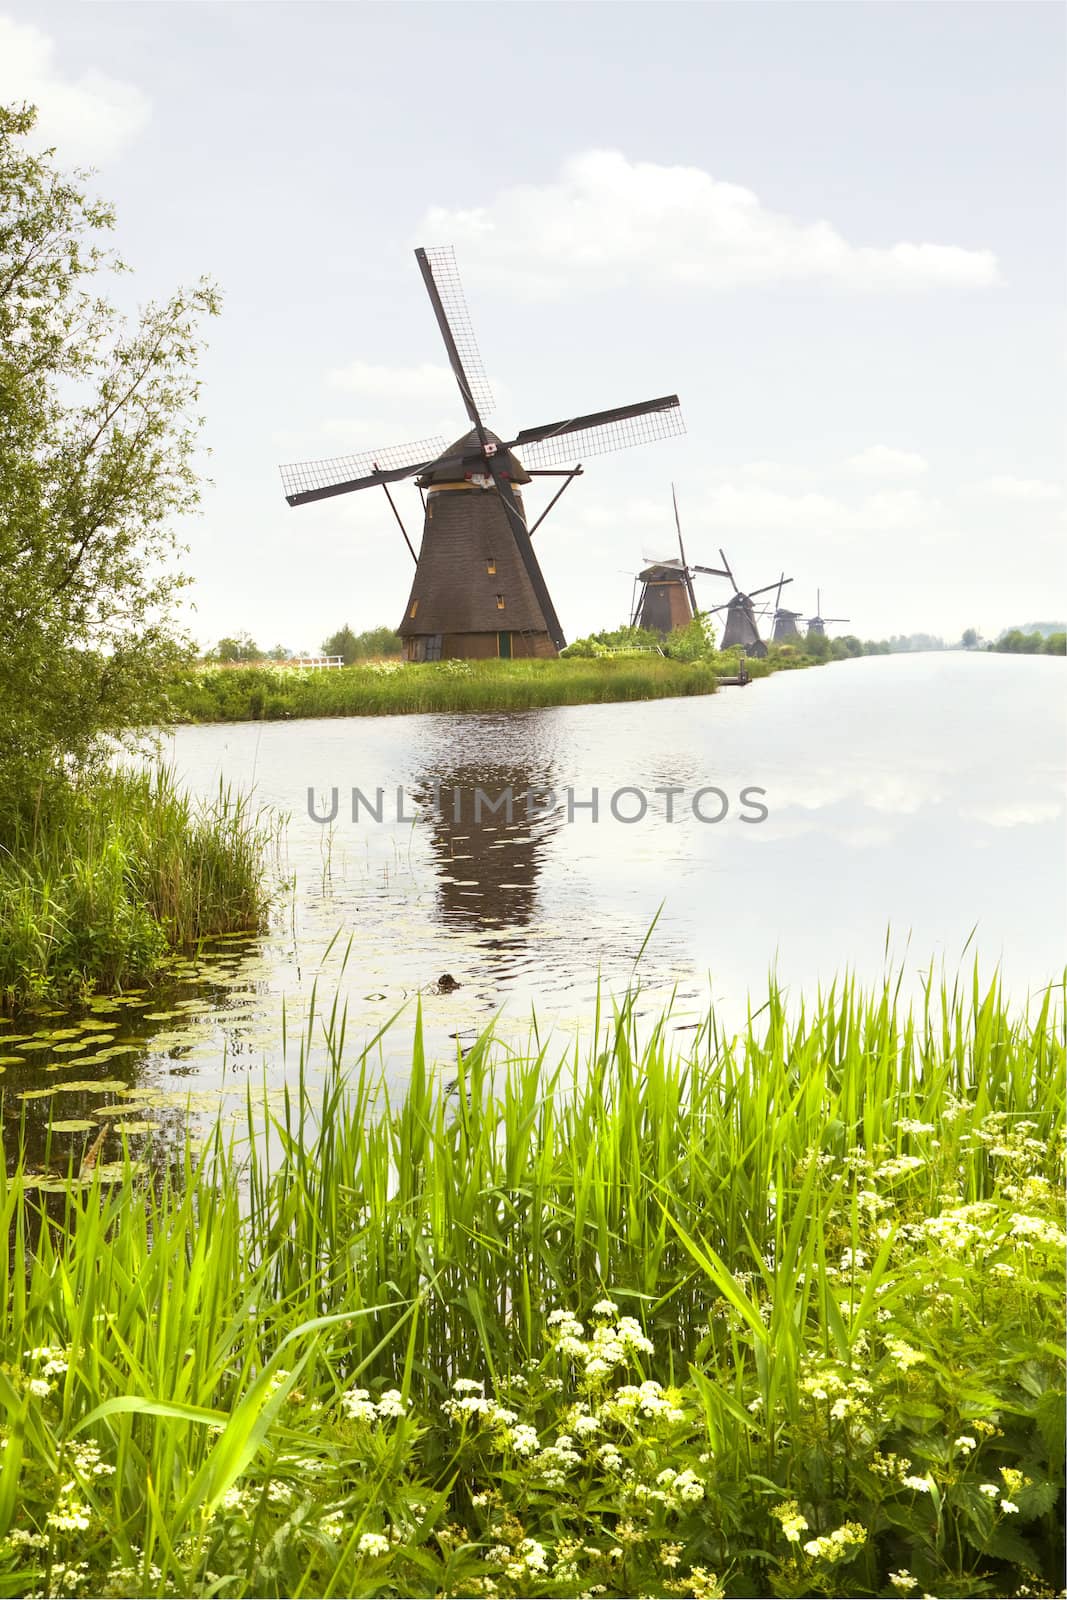 Row of windmills in Kinderdijk, the Netherlands in spring with blooming Cow parsley